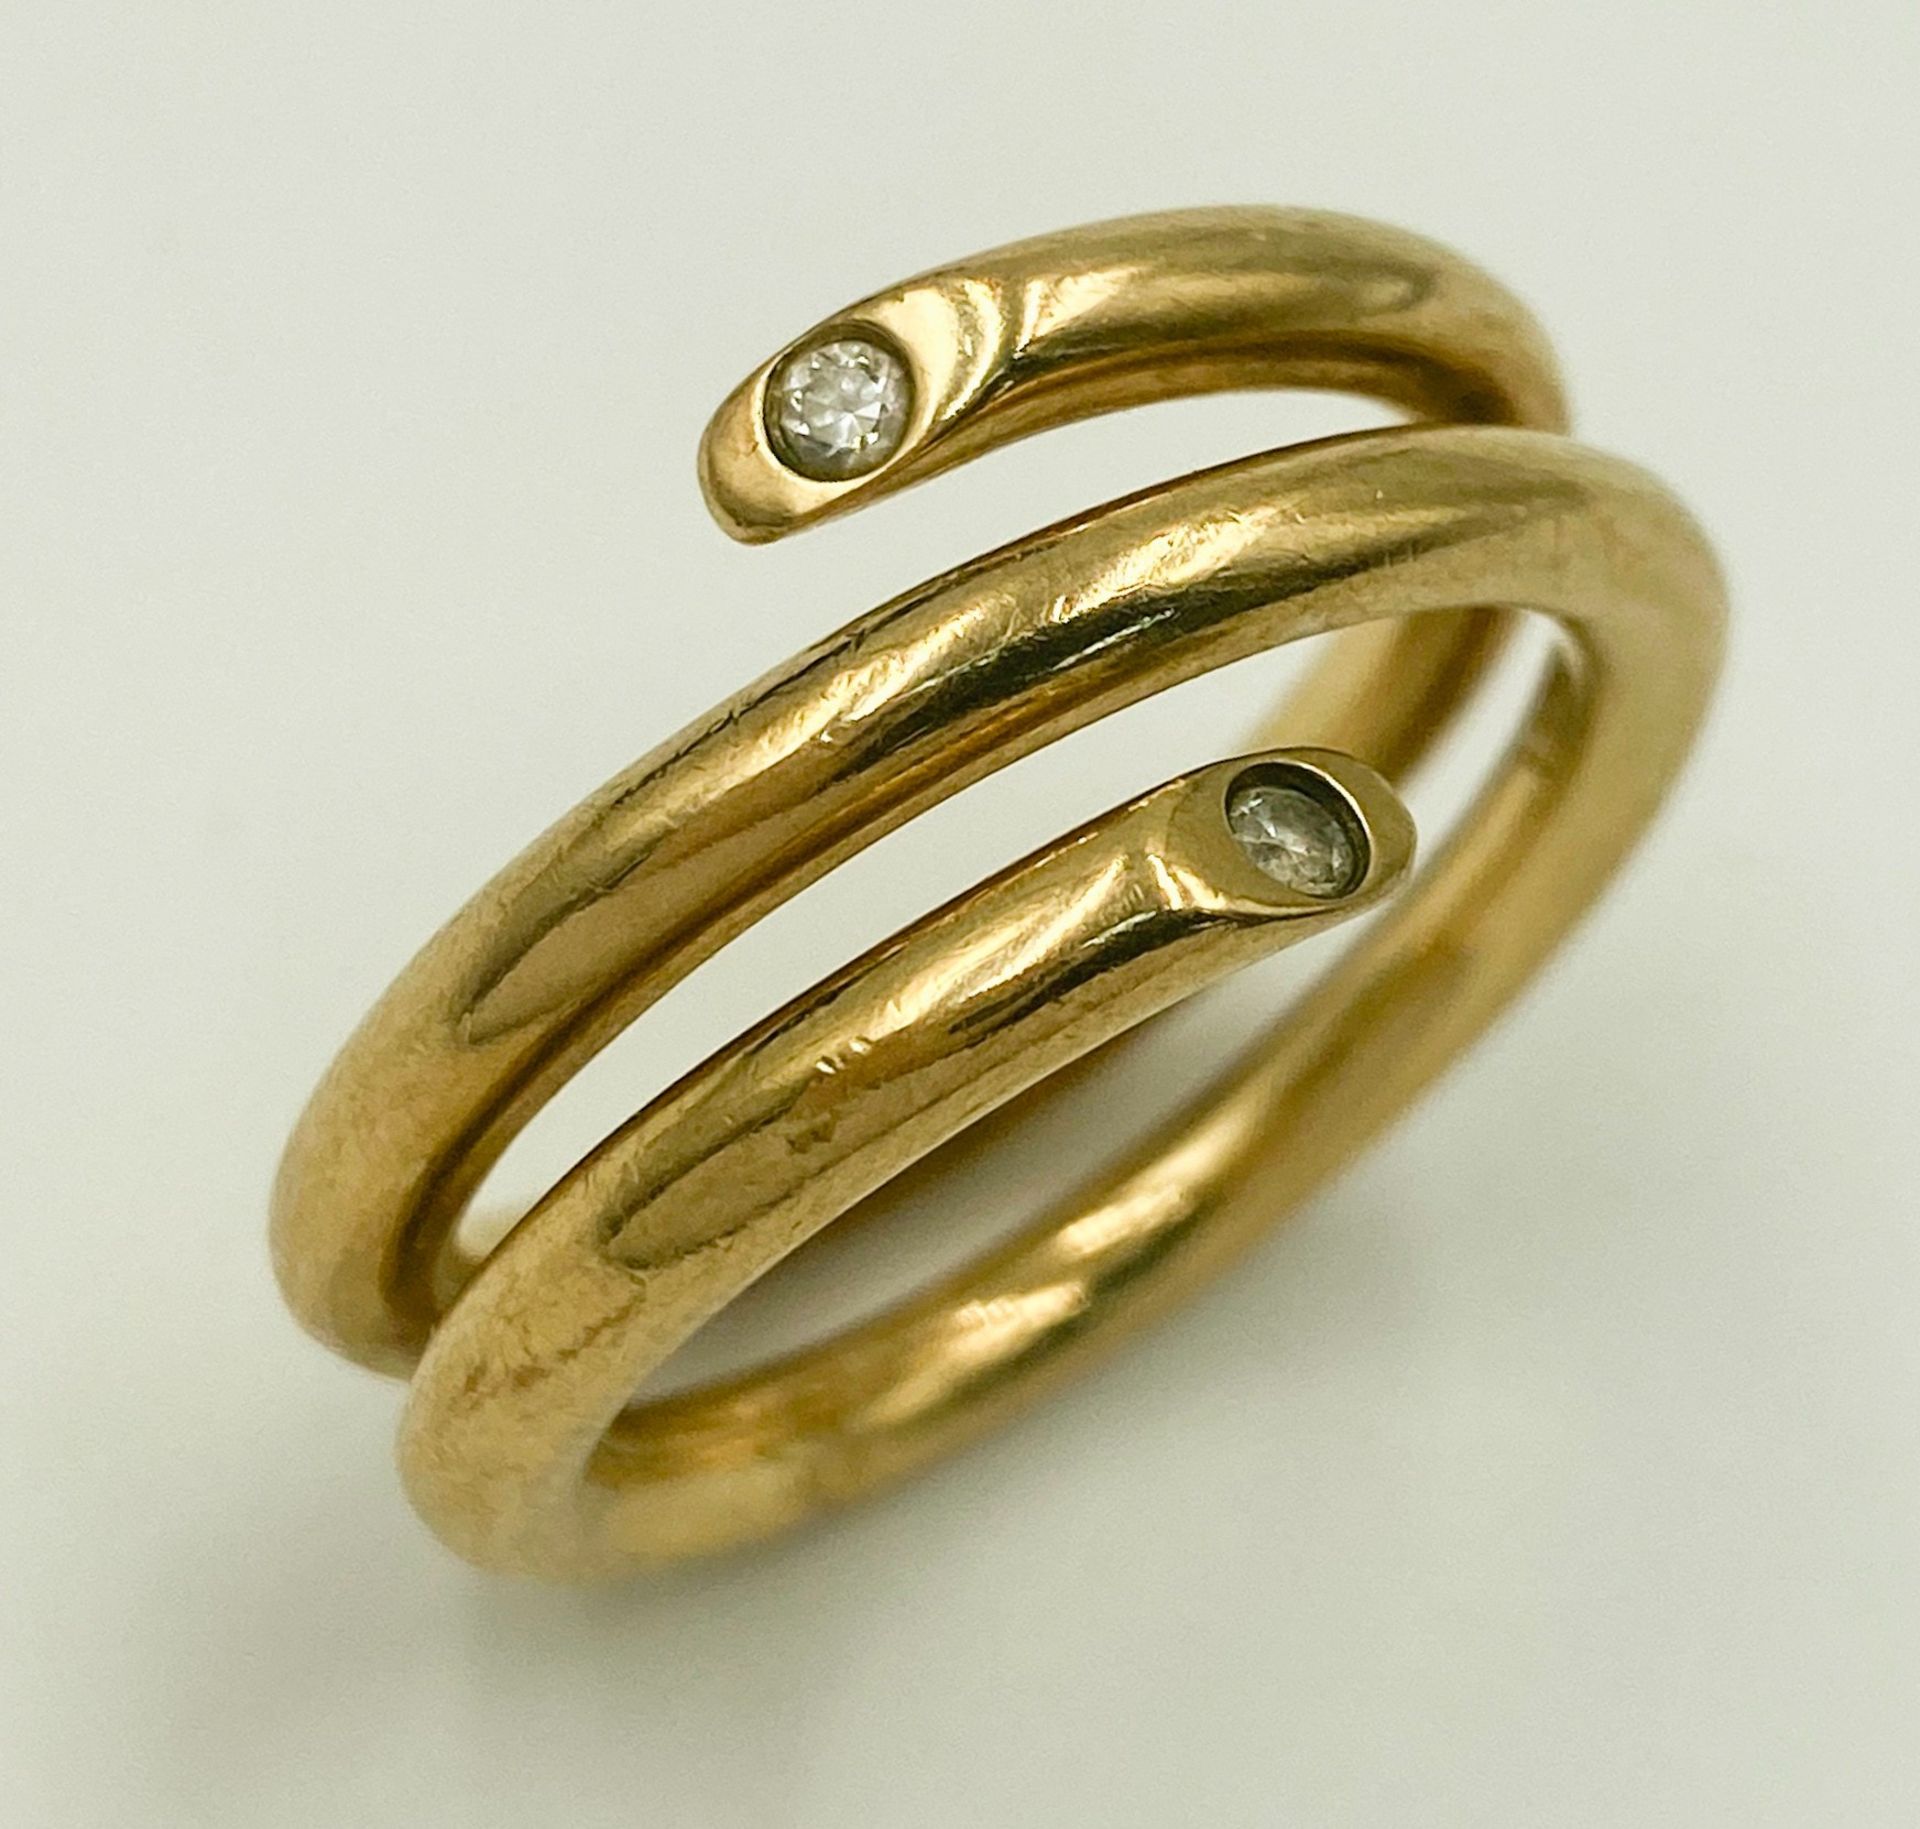 A 9K YELLOW GOLD, SERPENT STYLE DIAMOND BAND RING. 10G. SIZE T.